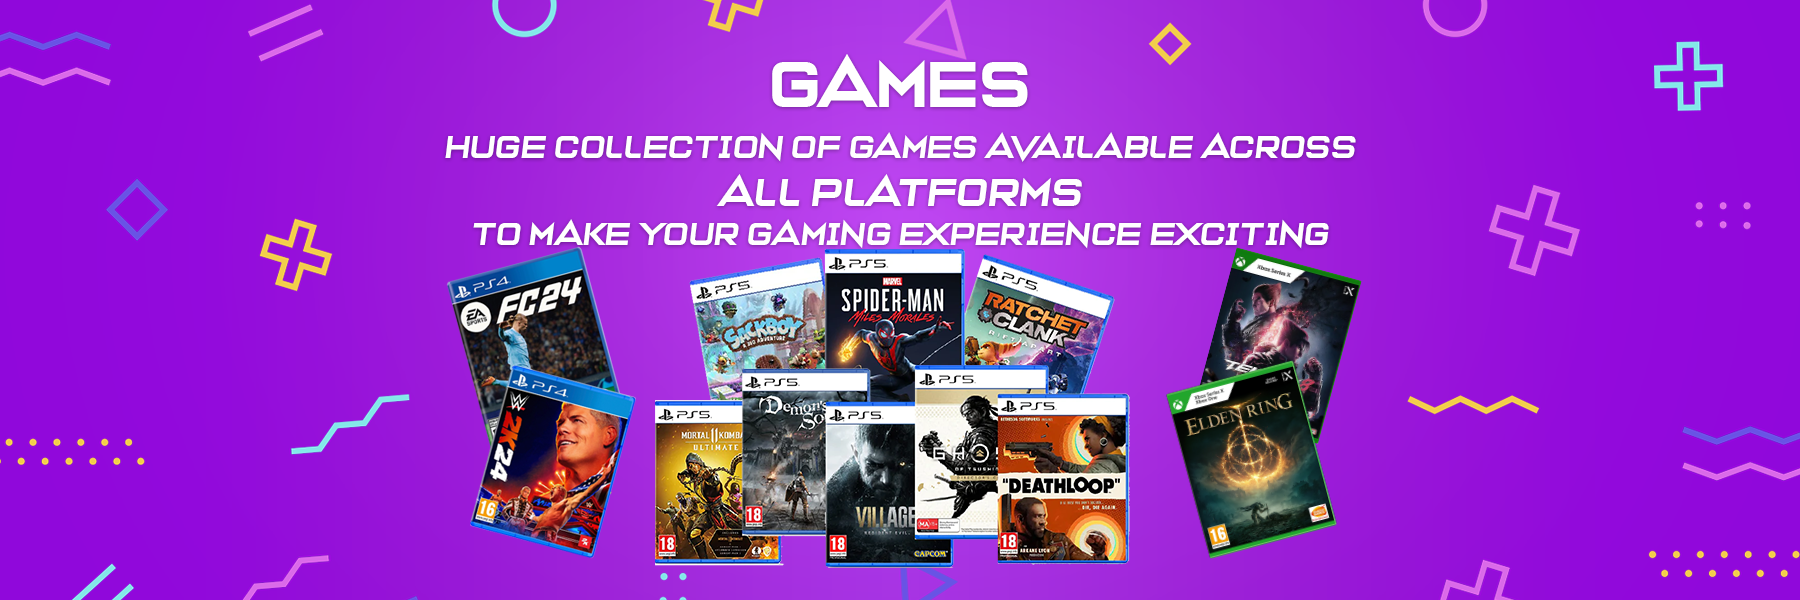 All platform video games available at gamexp